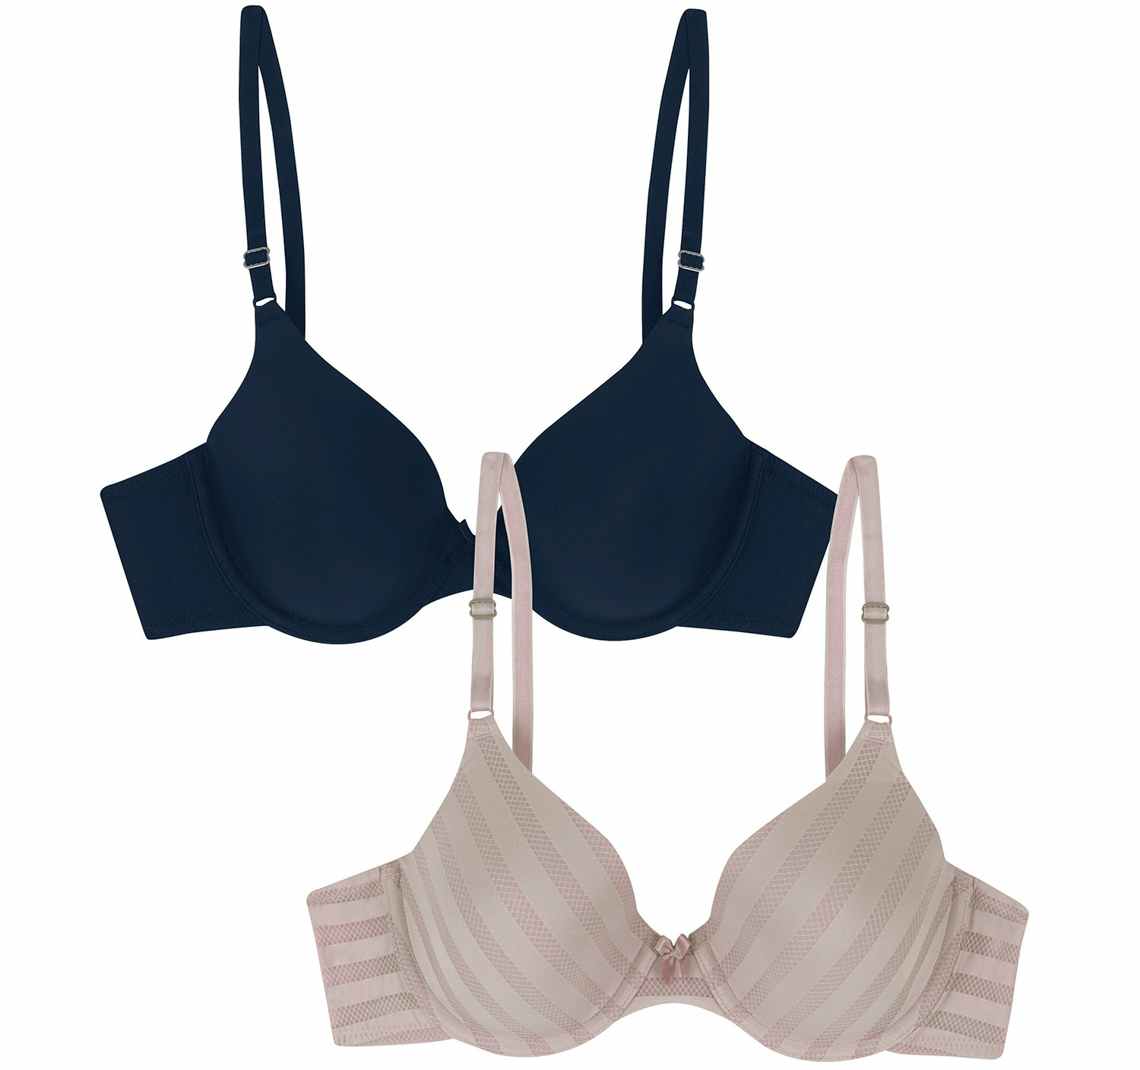 stock photo of two maidenform t shirt bras in navy and neutral